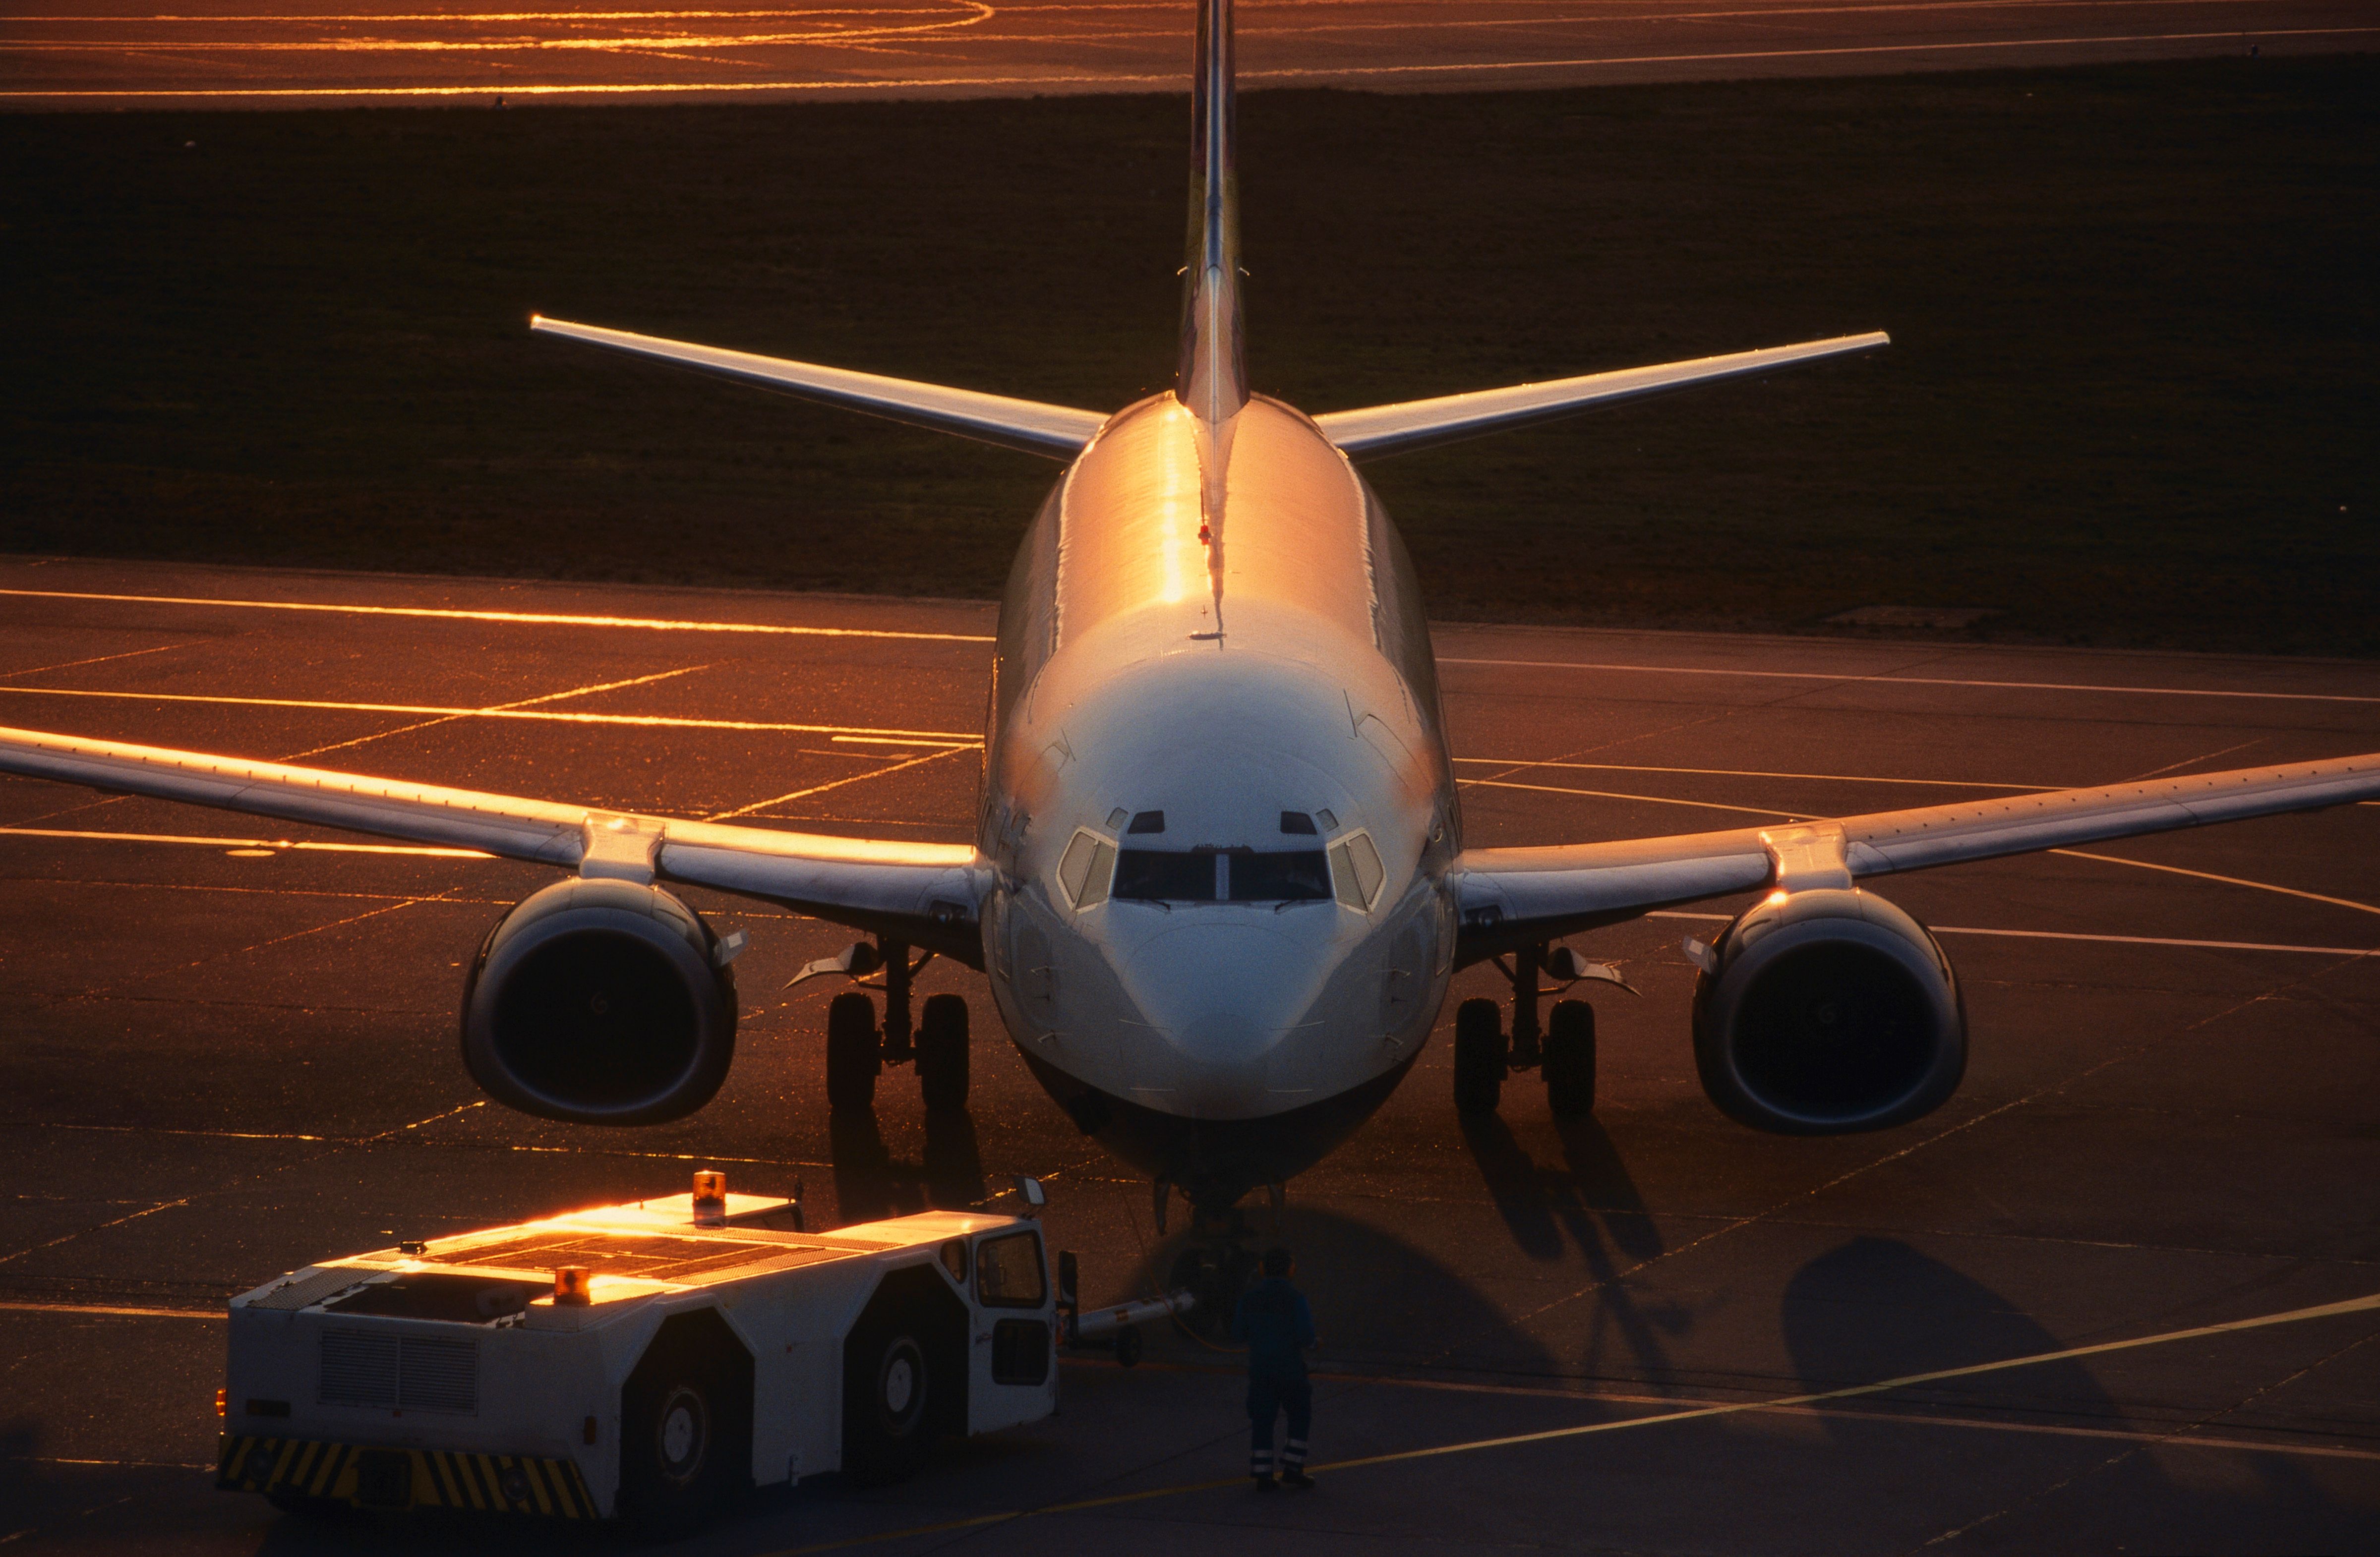 Boeing 737-300 being pushed-back by a tug at dusk